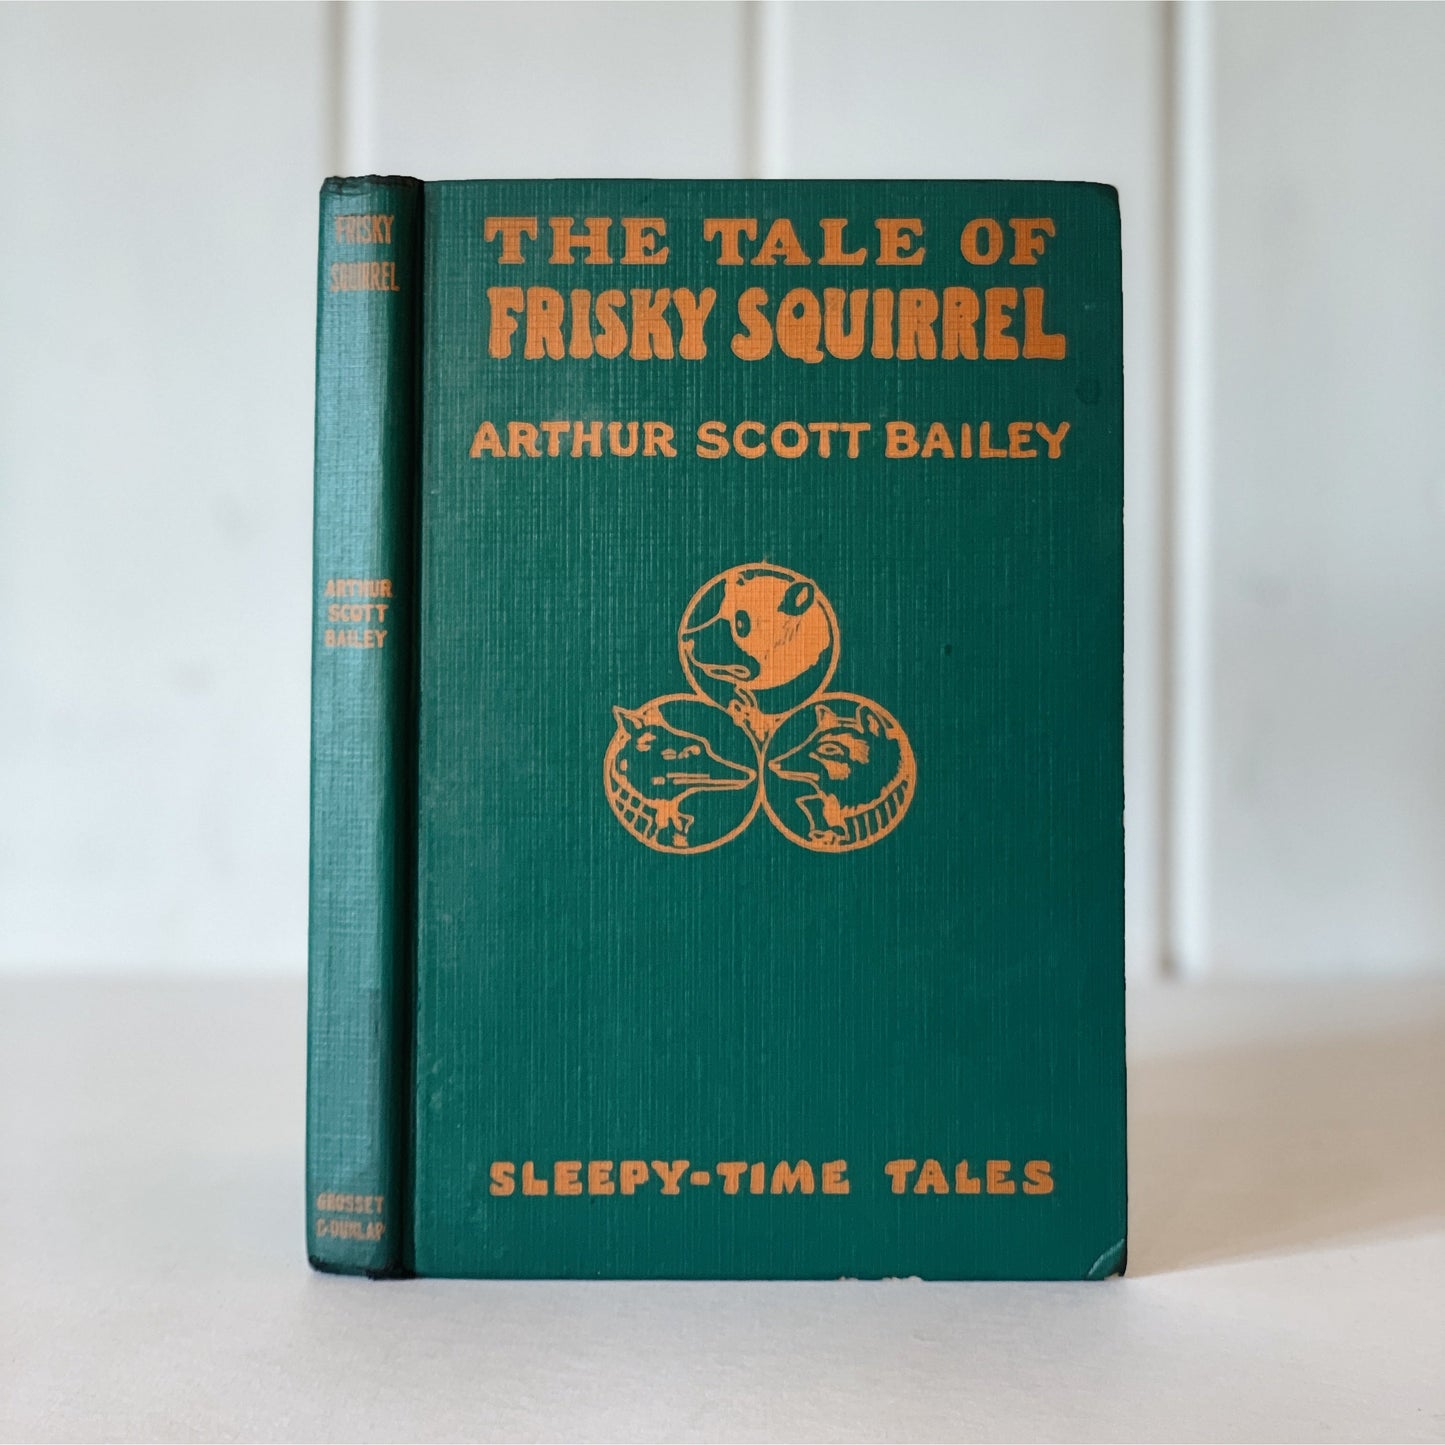 The Tale of Frisky Squirrel, Arthur Scott Bailey, 1915, Hardcover Illustrated Children's Book